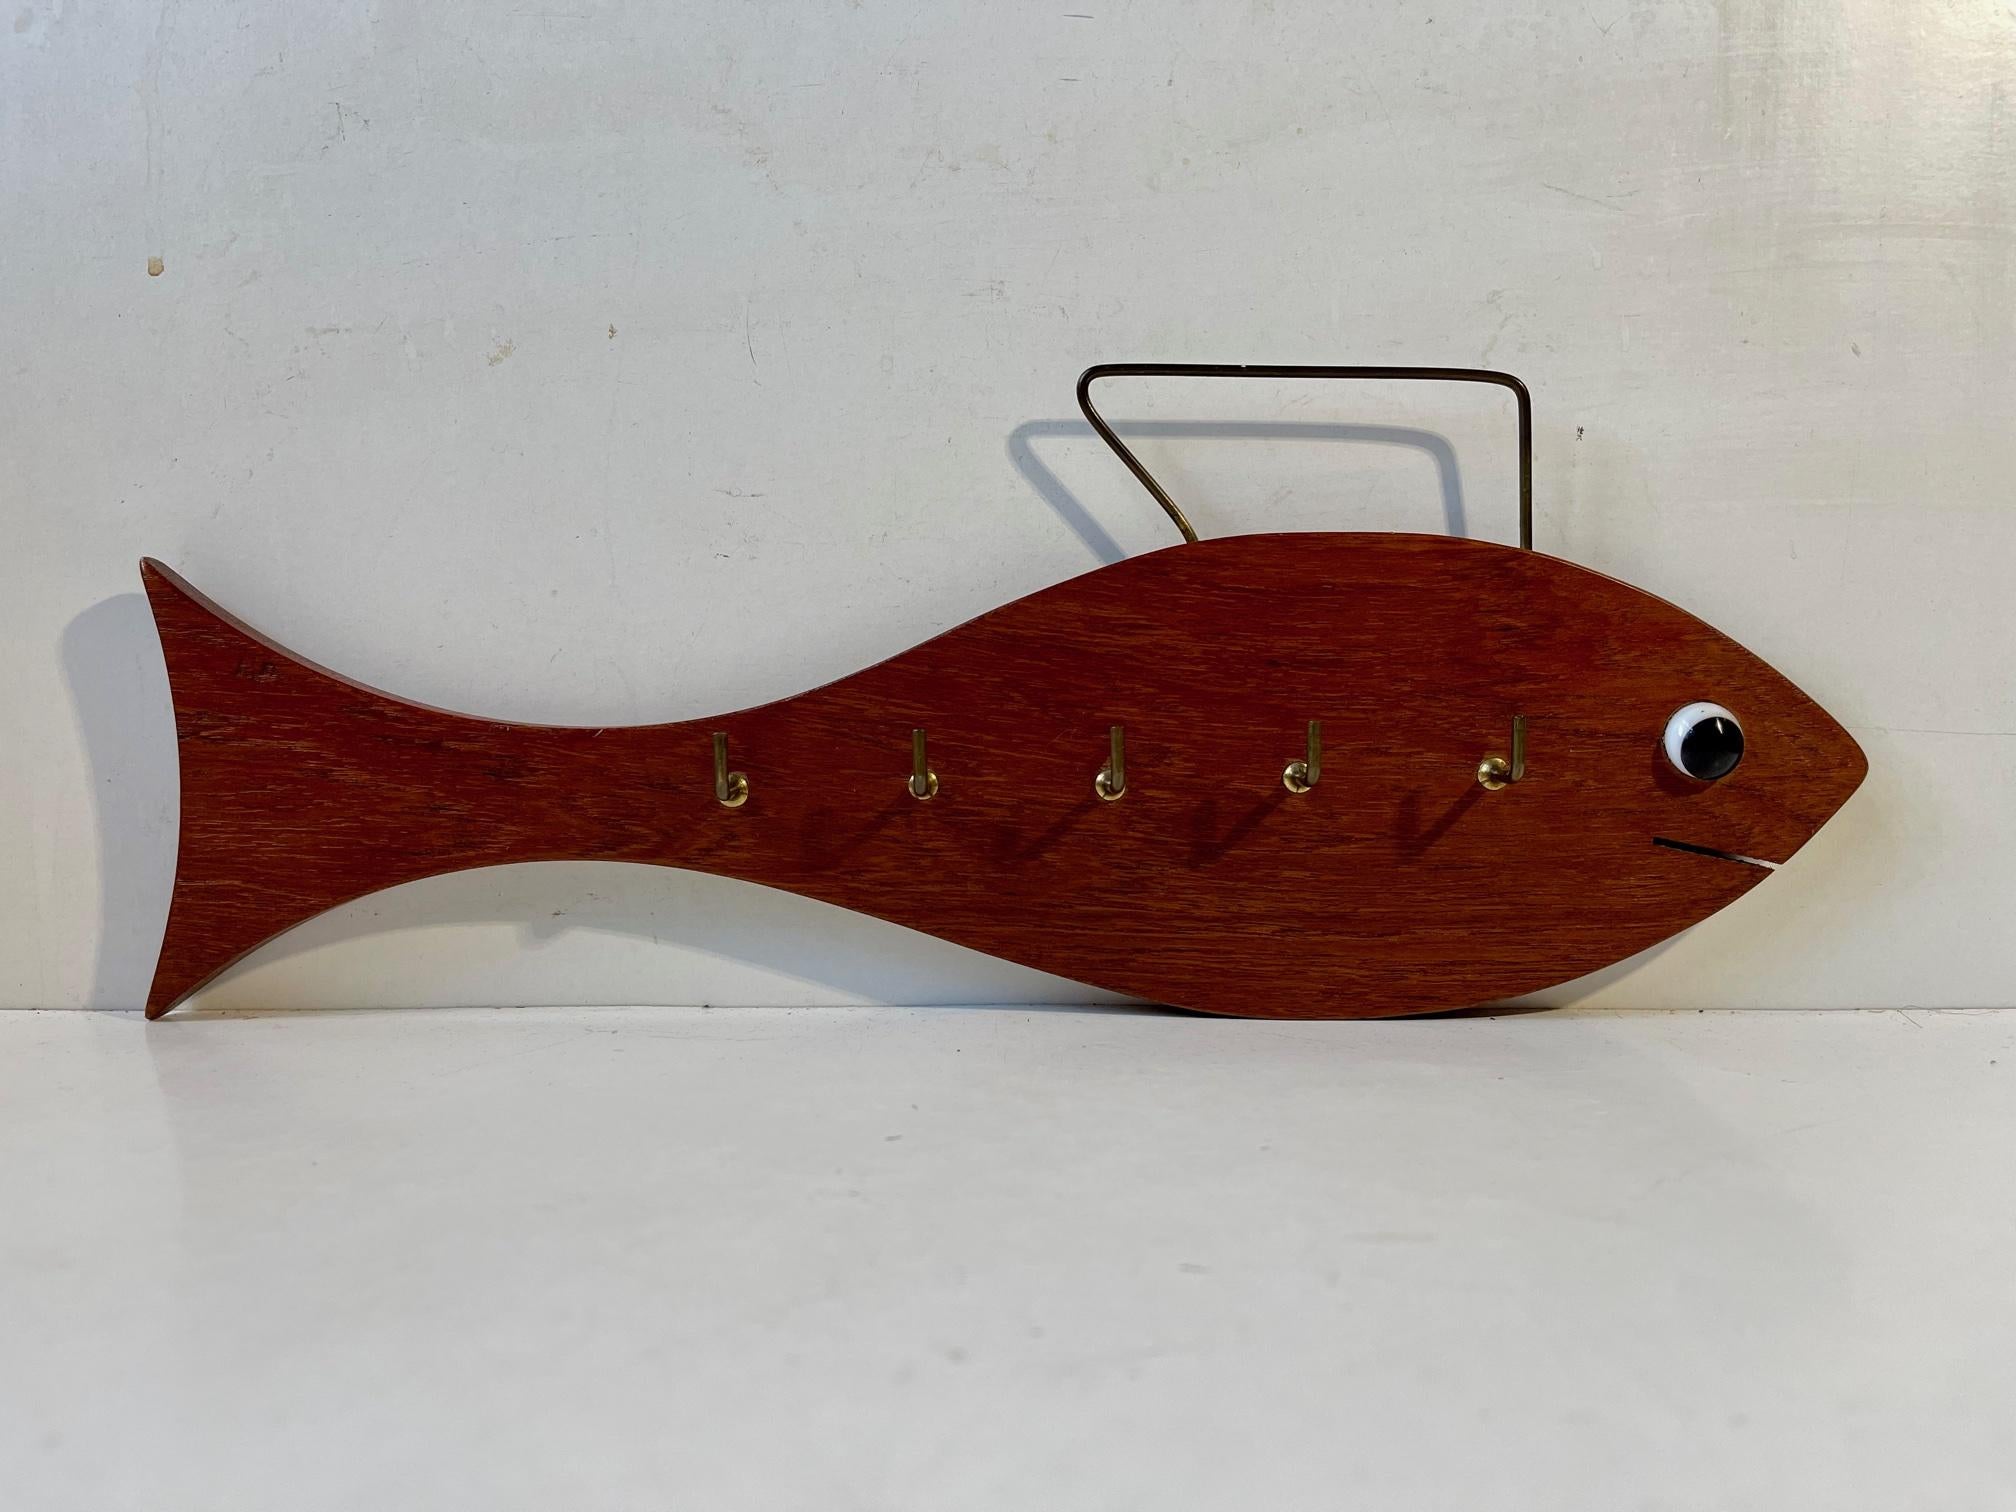 Unusual wall mounted shark-shaped key holder in teak. Decorated with details in brass and a black and white glass eye. Imprinted to its backside HAJ, Copyright. Possibly designed by Hans Agne Jakobsson who frequently marked his designs HAJ.